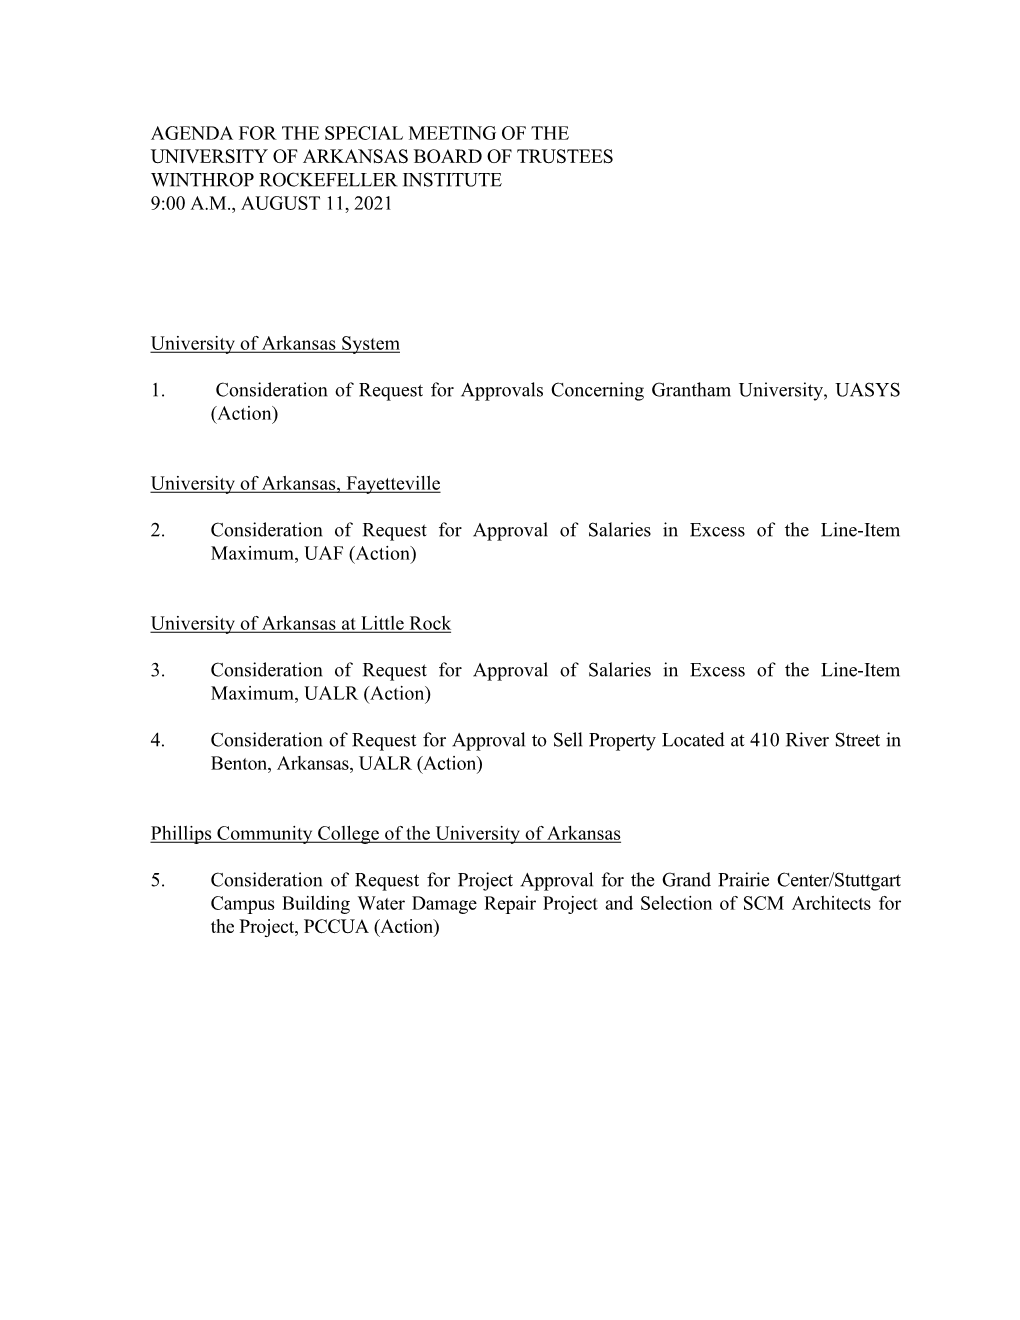 Agenda for the Special Meeting of the University of Arkansas Board of Trustees Winthrop Rockefeller Institute 9:00 A.M., August 11, 2021